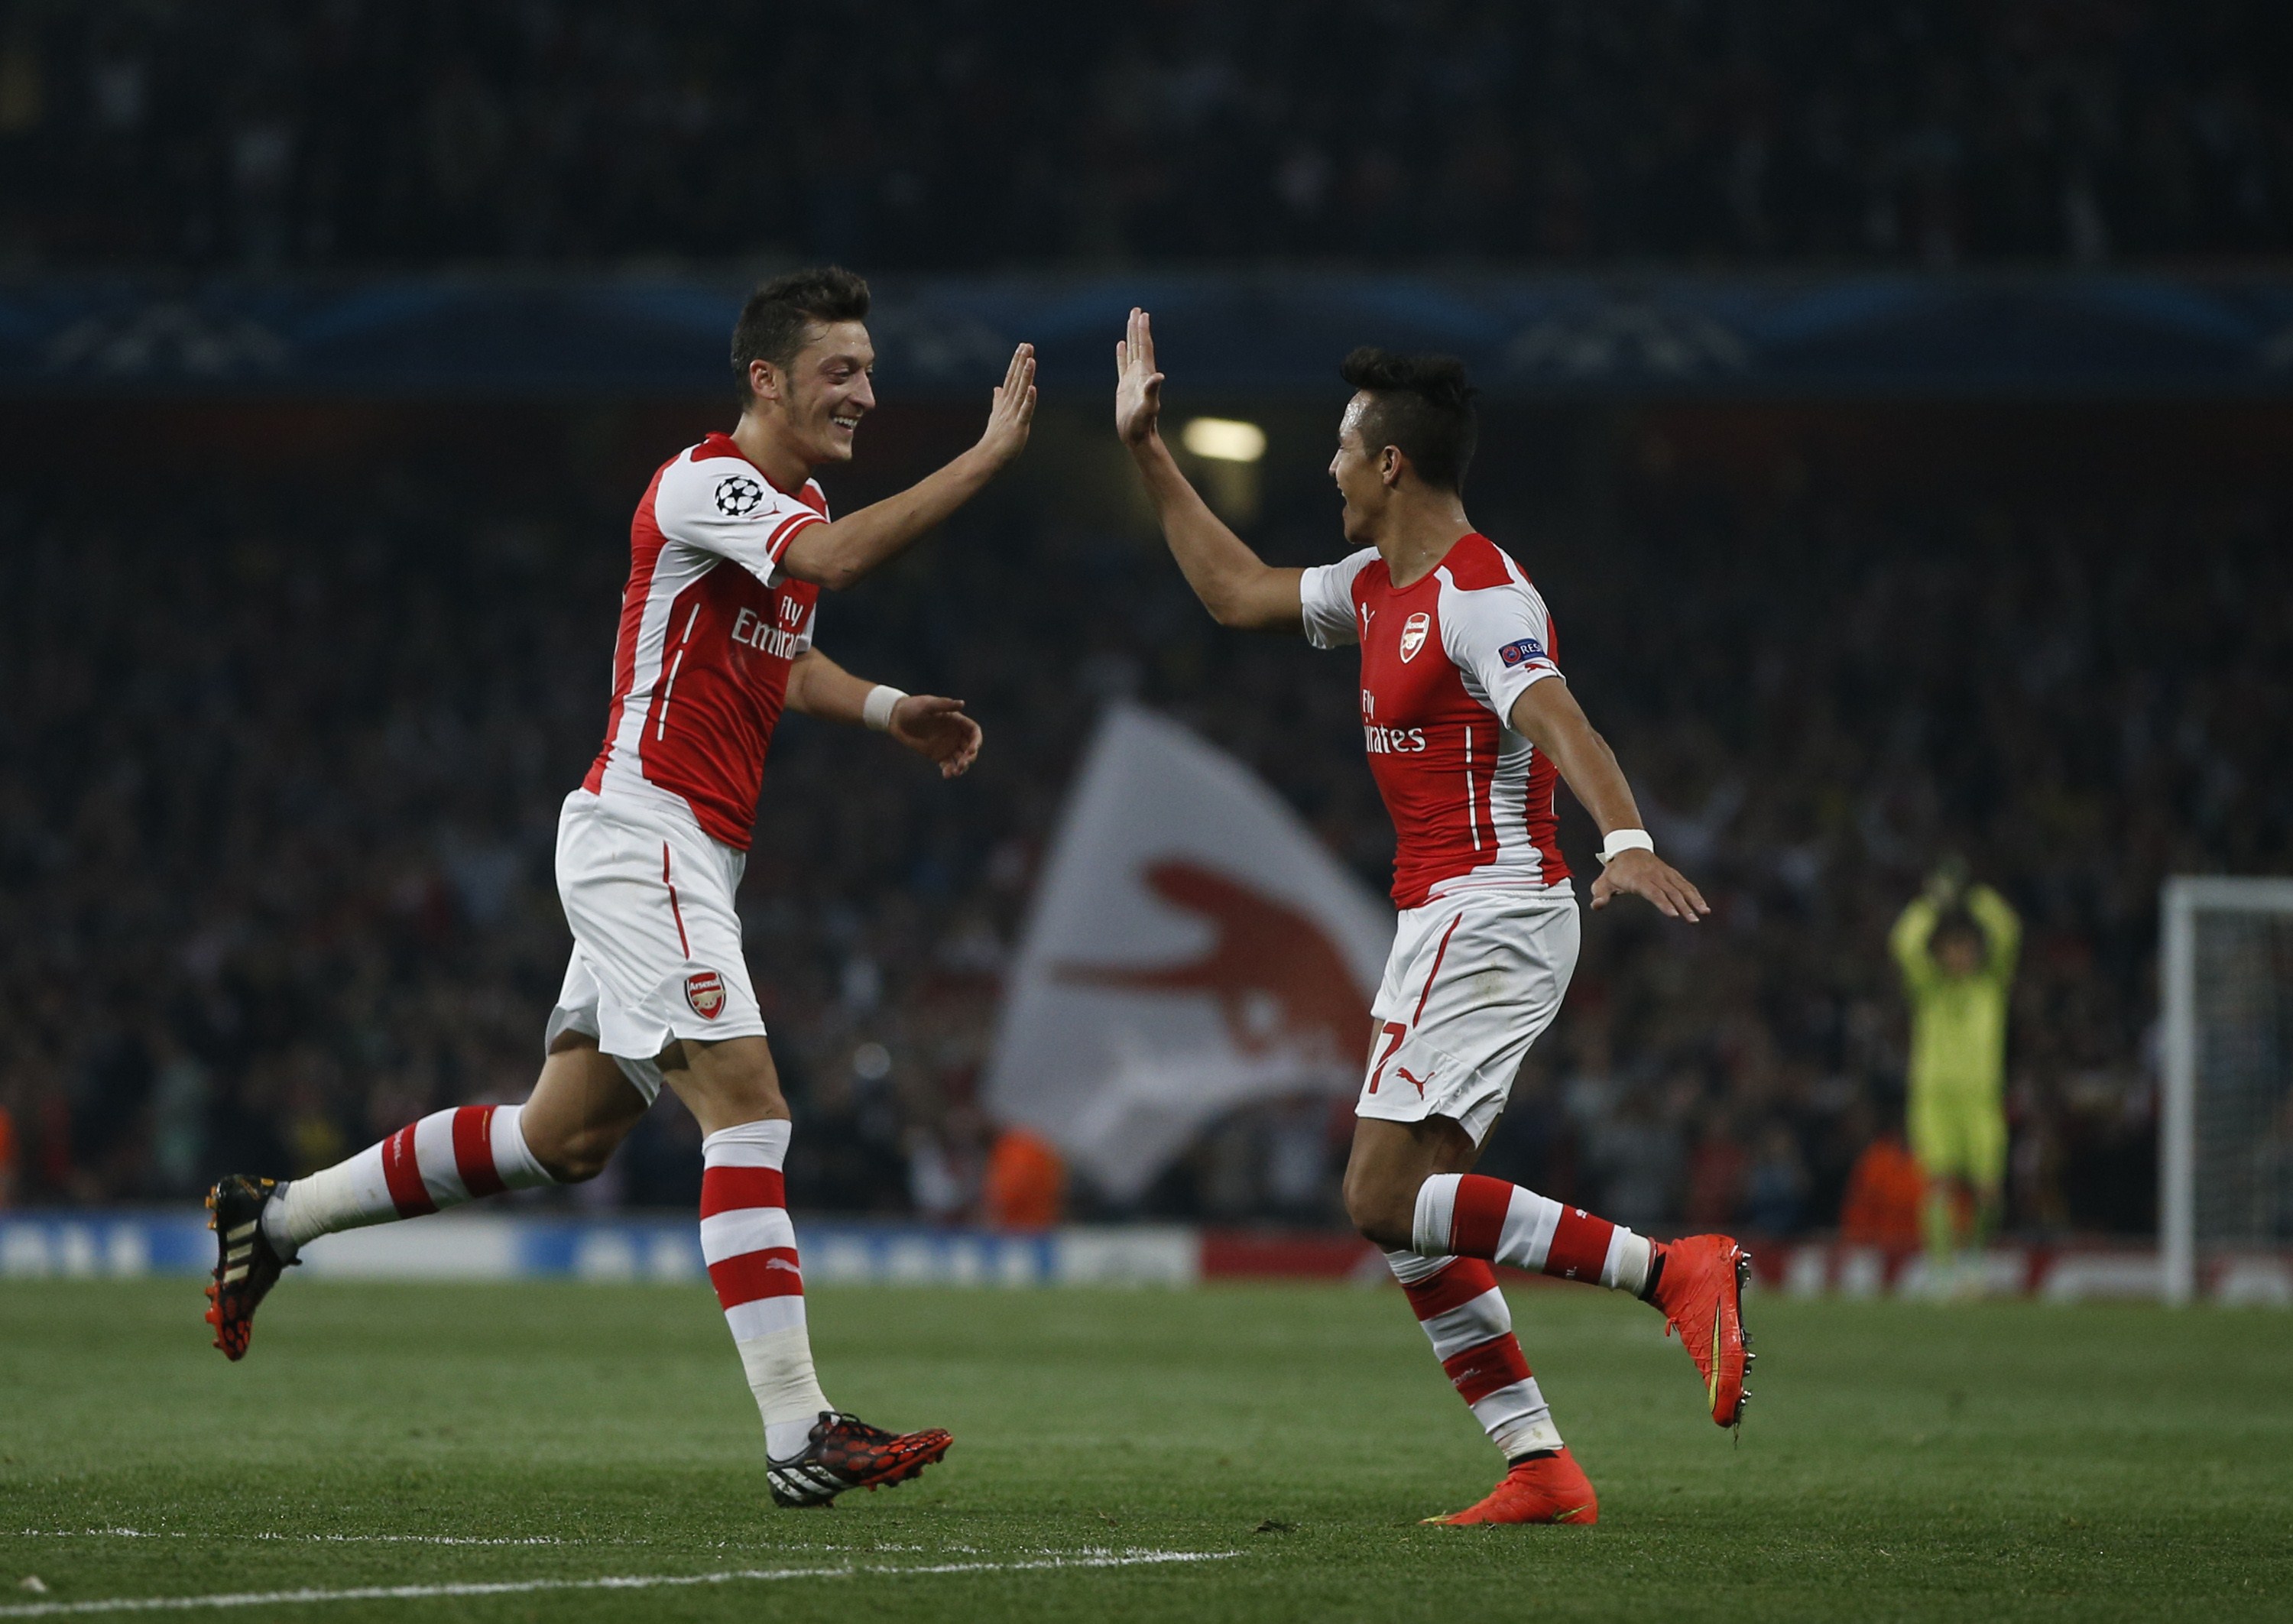 Arsenal's Chilean striker Alexis Sanchez (R) celebrates scoring his goal with Arsenal's German midfielder Mesut Ozil (L) during the UEFA Champions League, Group D football match between Arsenal and Galatasaray at The Emirates Stadium in north London on October 1, 2014. Arsenal won the game 4-1. (Photo by Adrian Dennis/AFP/Getty Images)